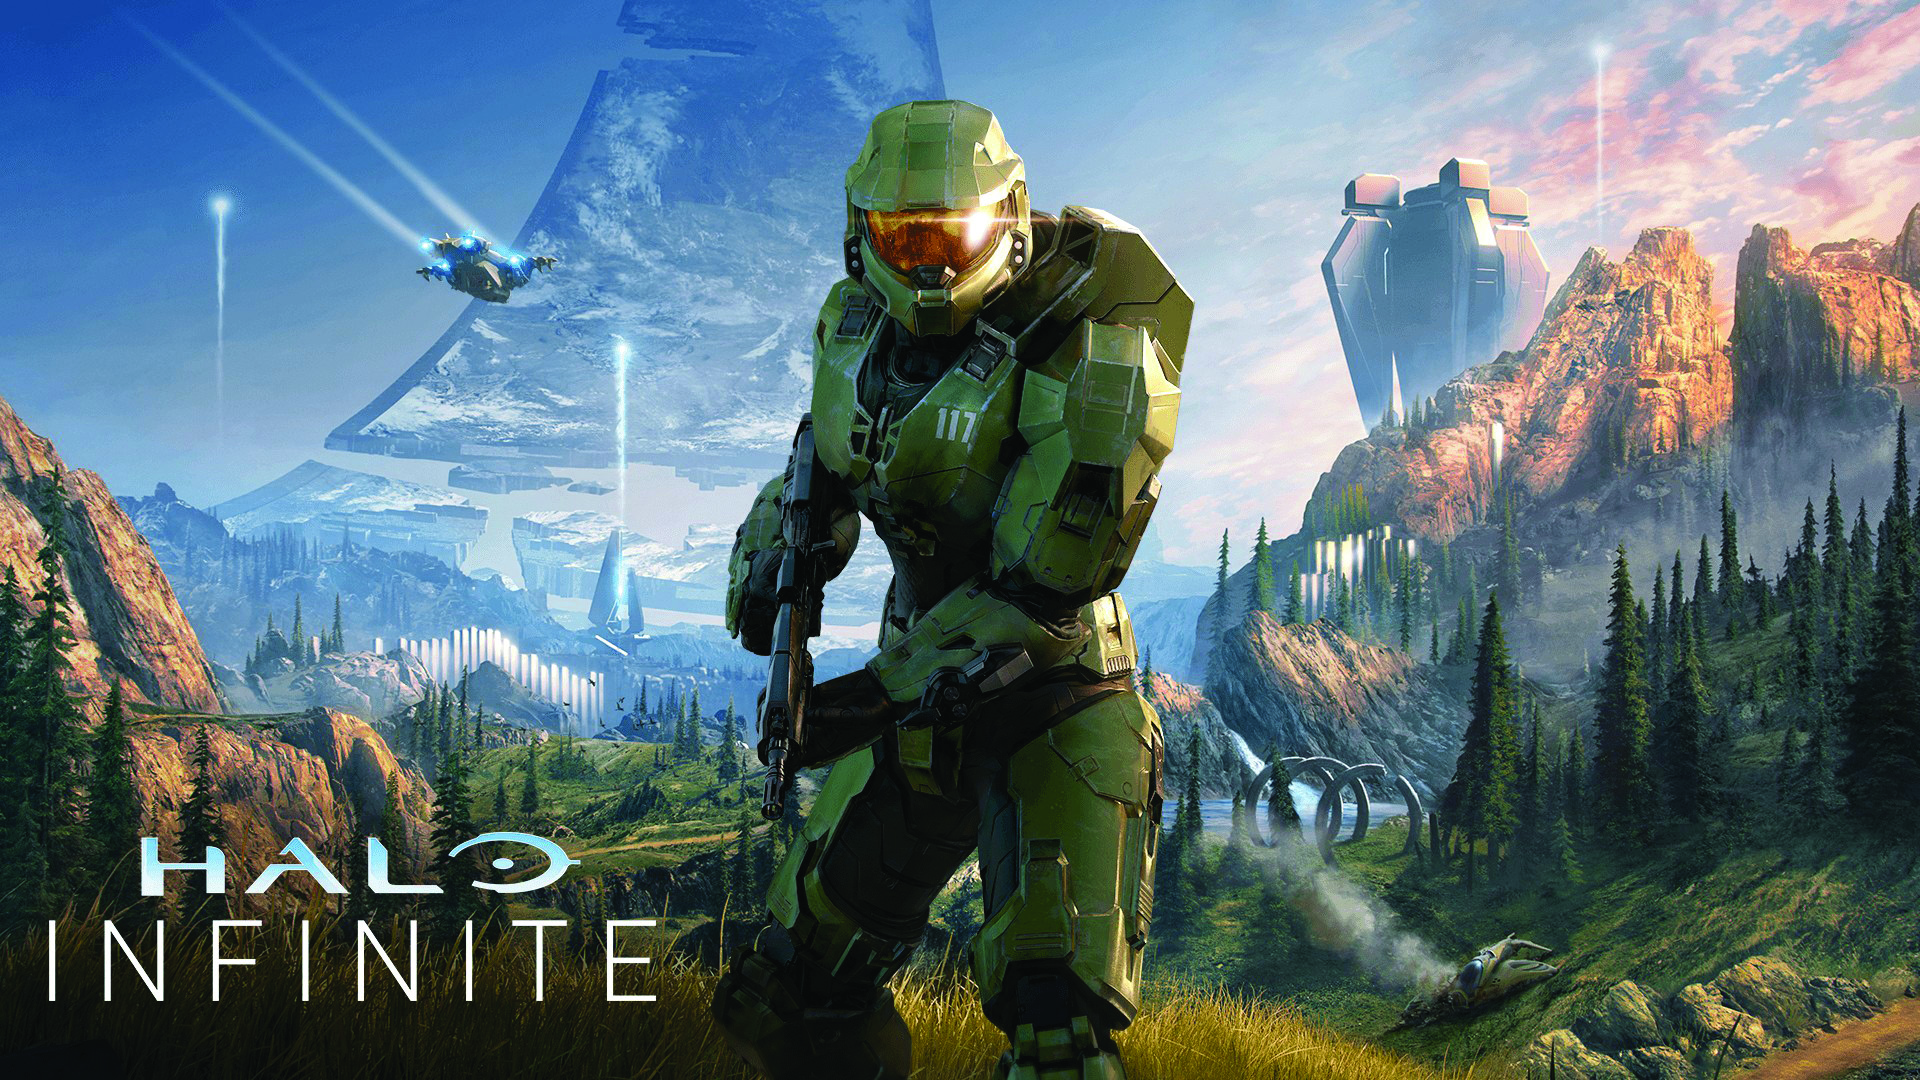 ‘Halo: Infinite’ meets expectations for series fans